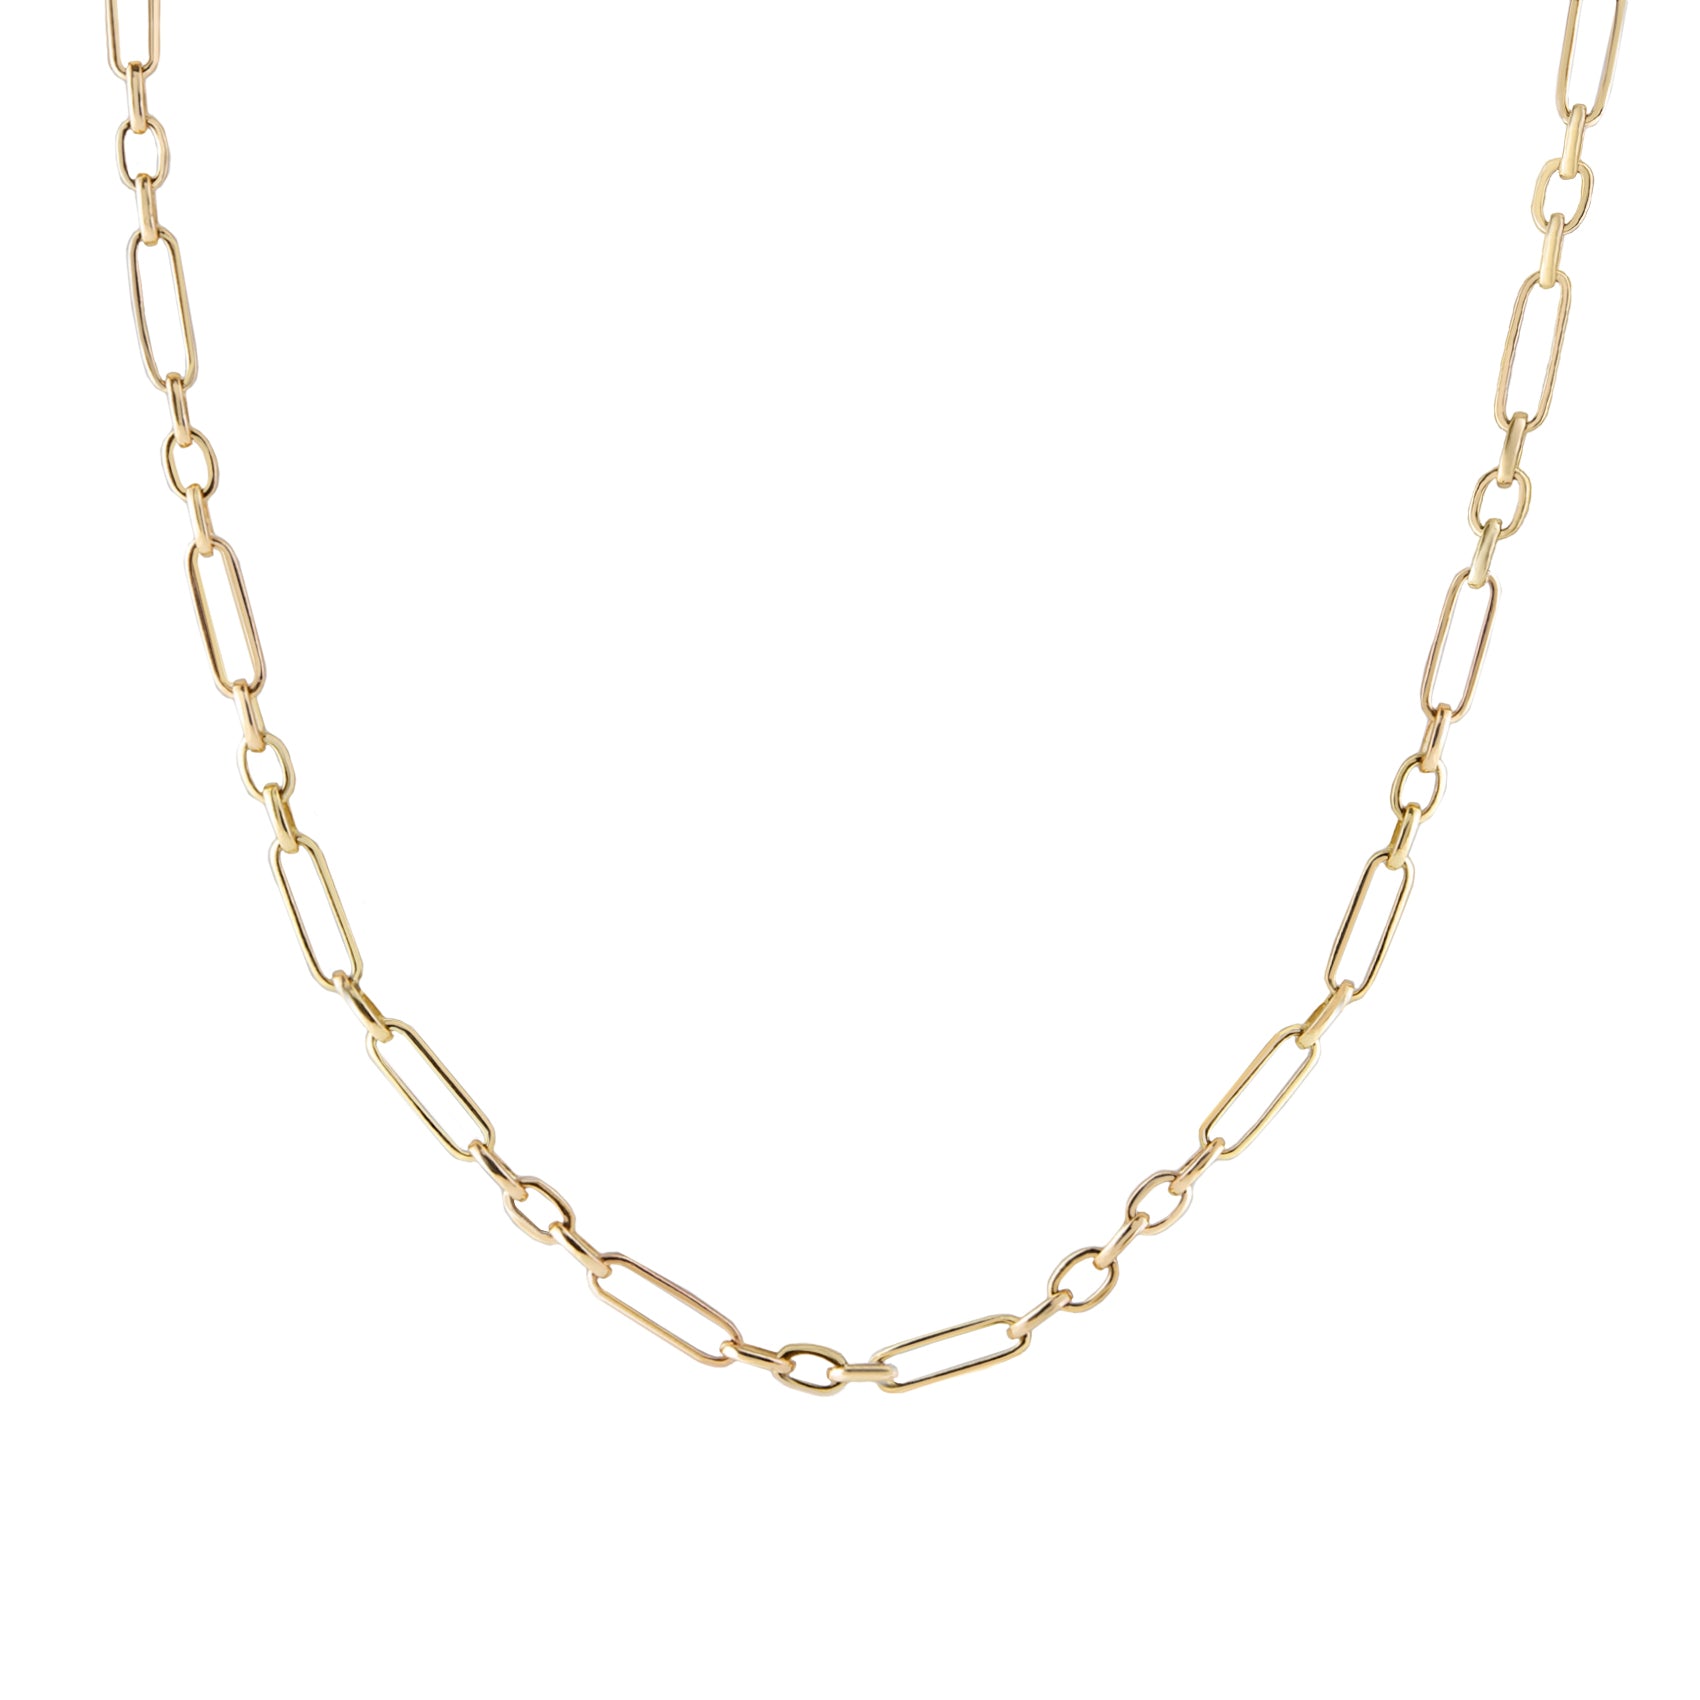 Metier by Tomfoolery chain necklace